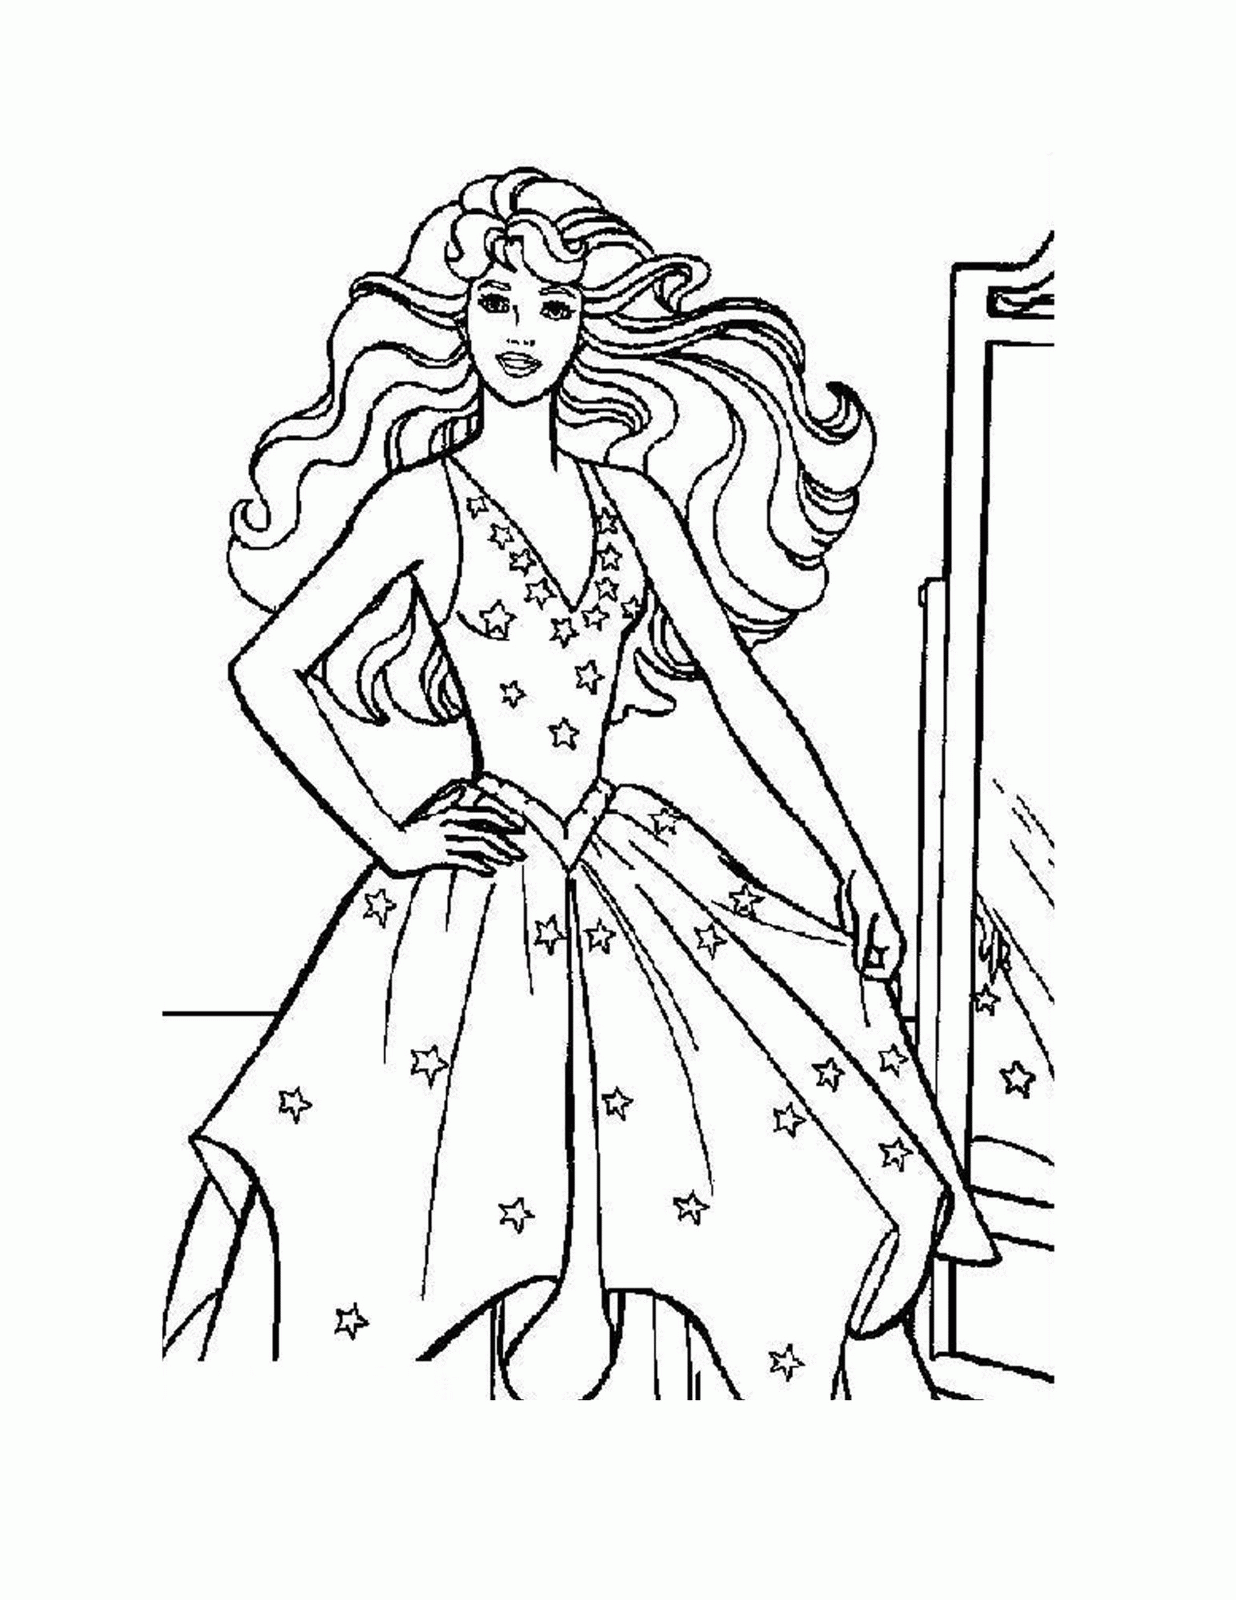 Disney Princess Coloring Pages Free To Print Coloring Home